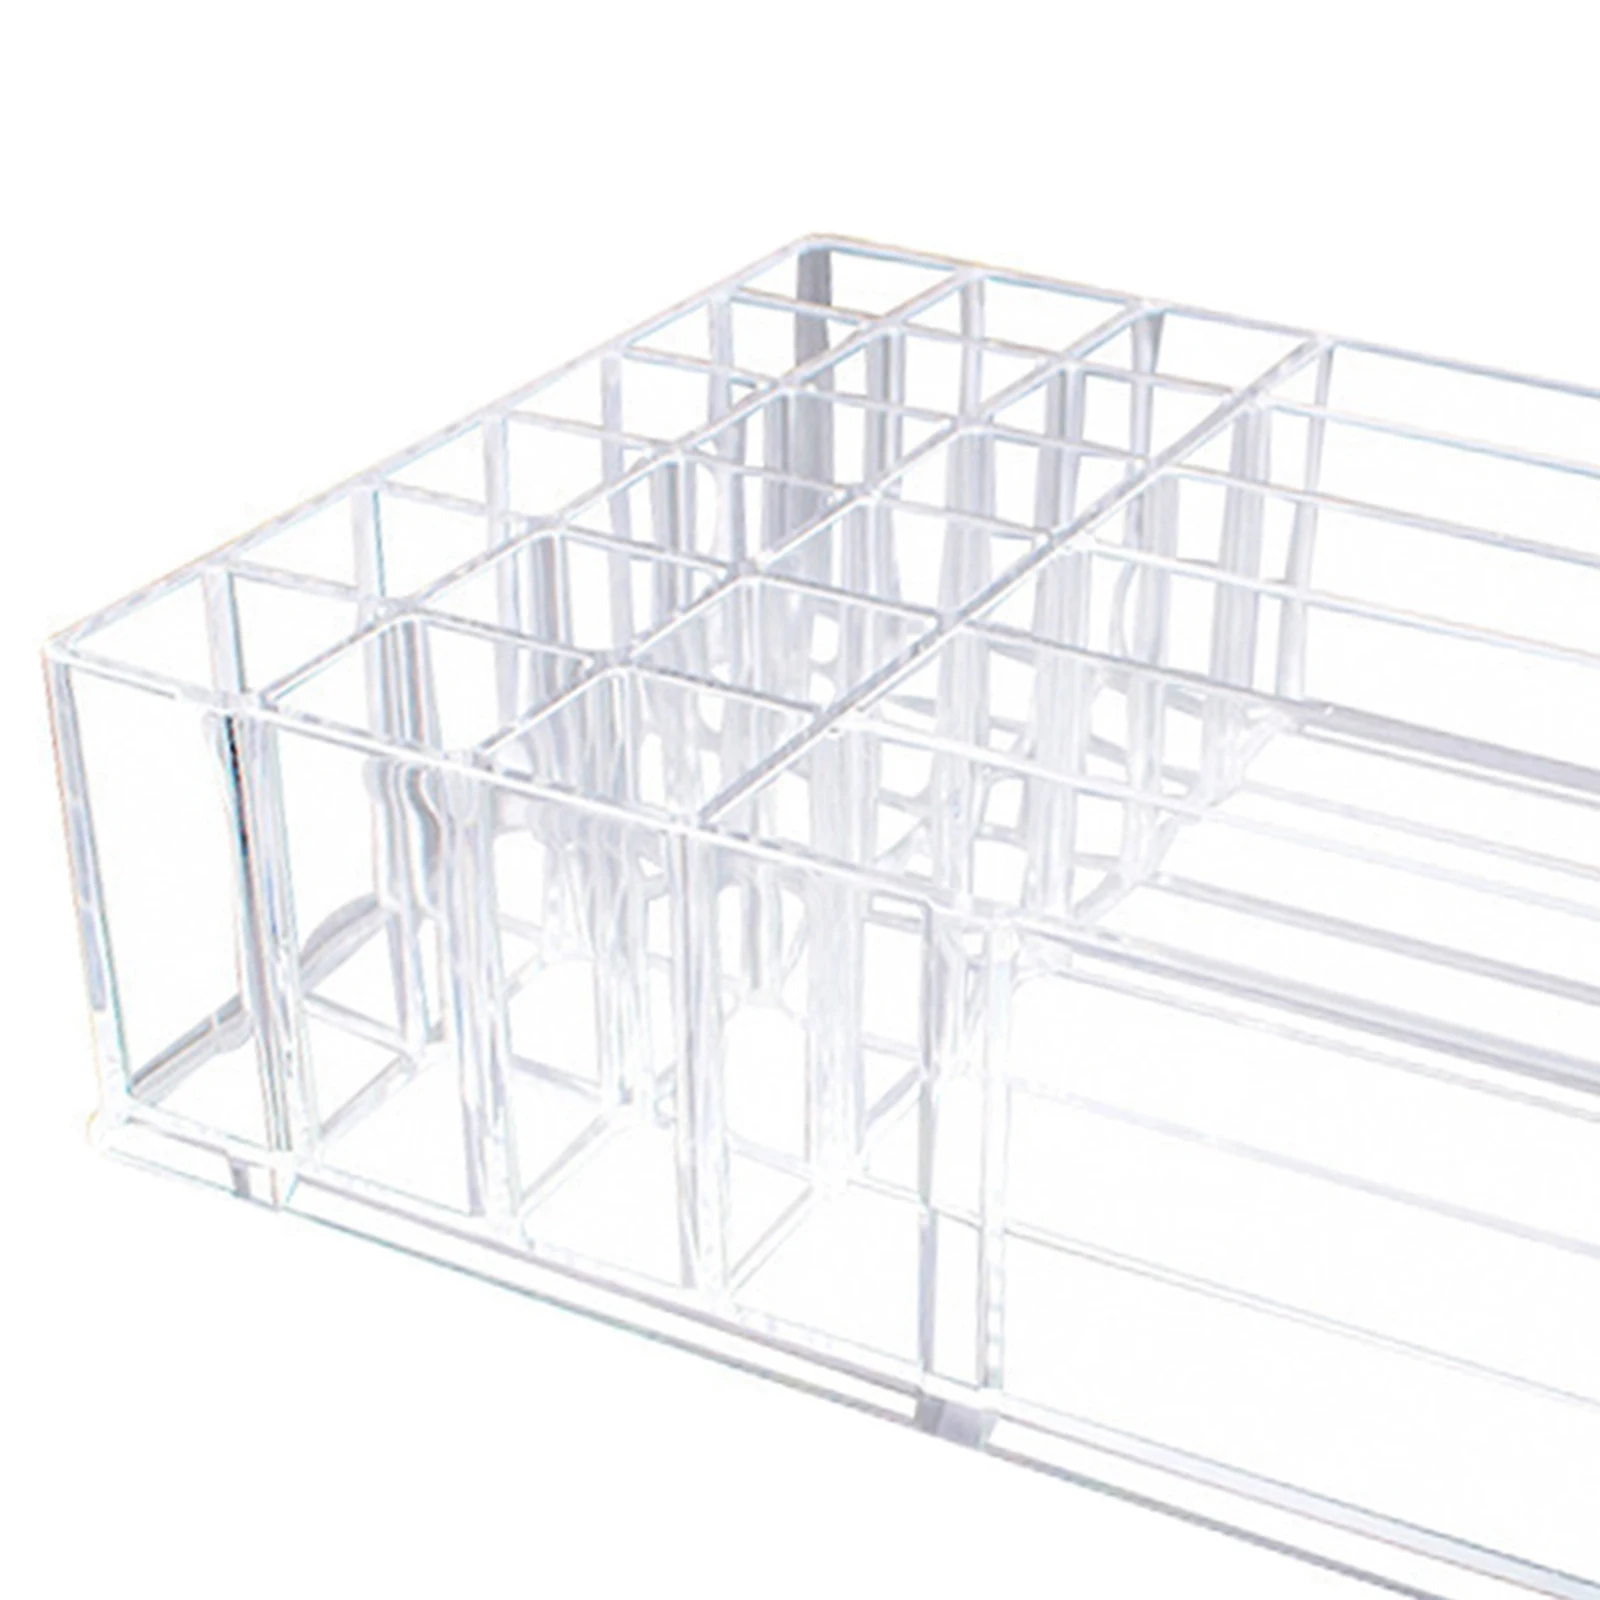 Acrylic Makeup Organizers and Storage Holder Make , can Adjust According Makeup and the Thickness of 